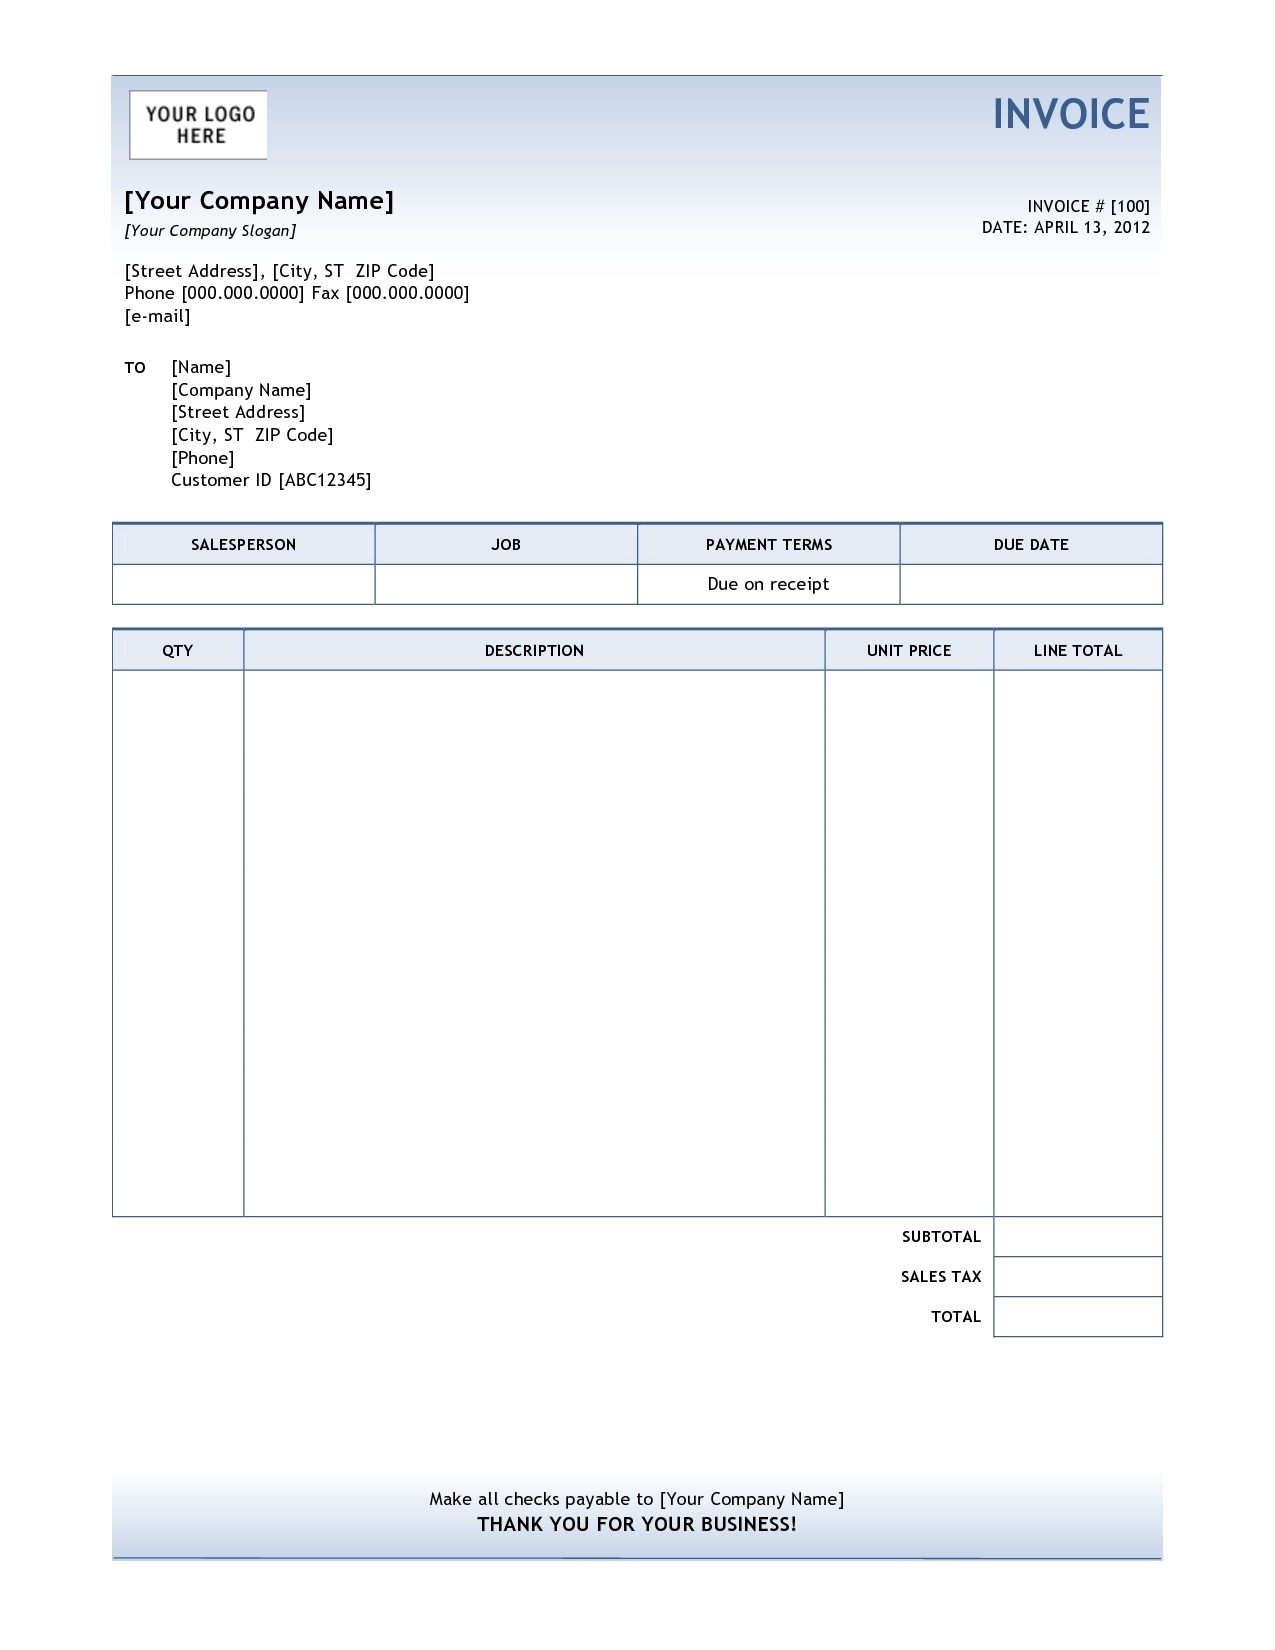 how to find an invoice template in word